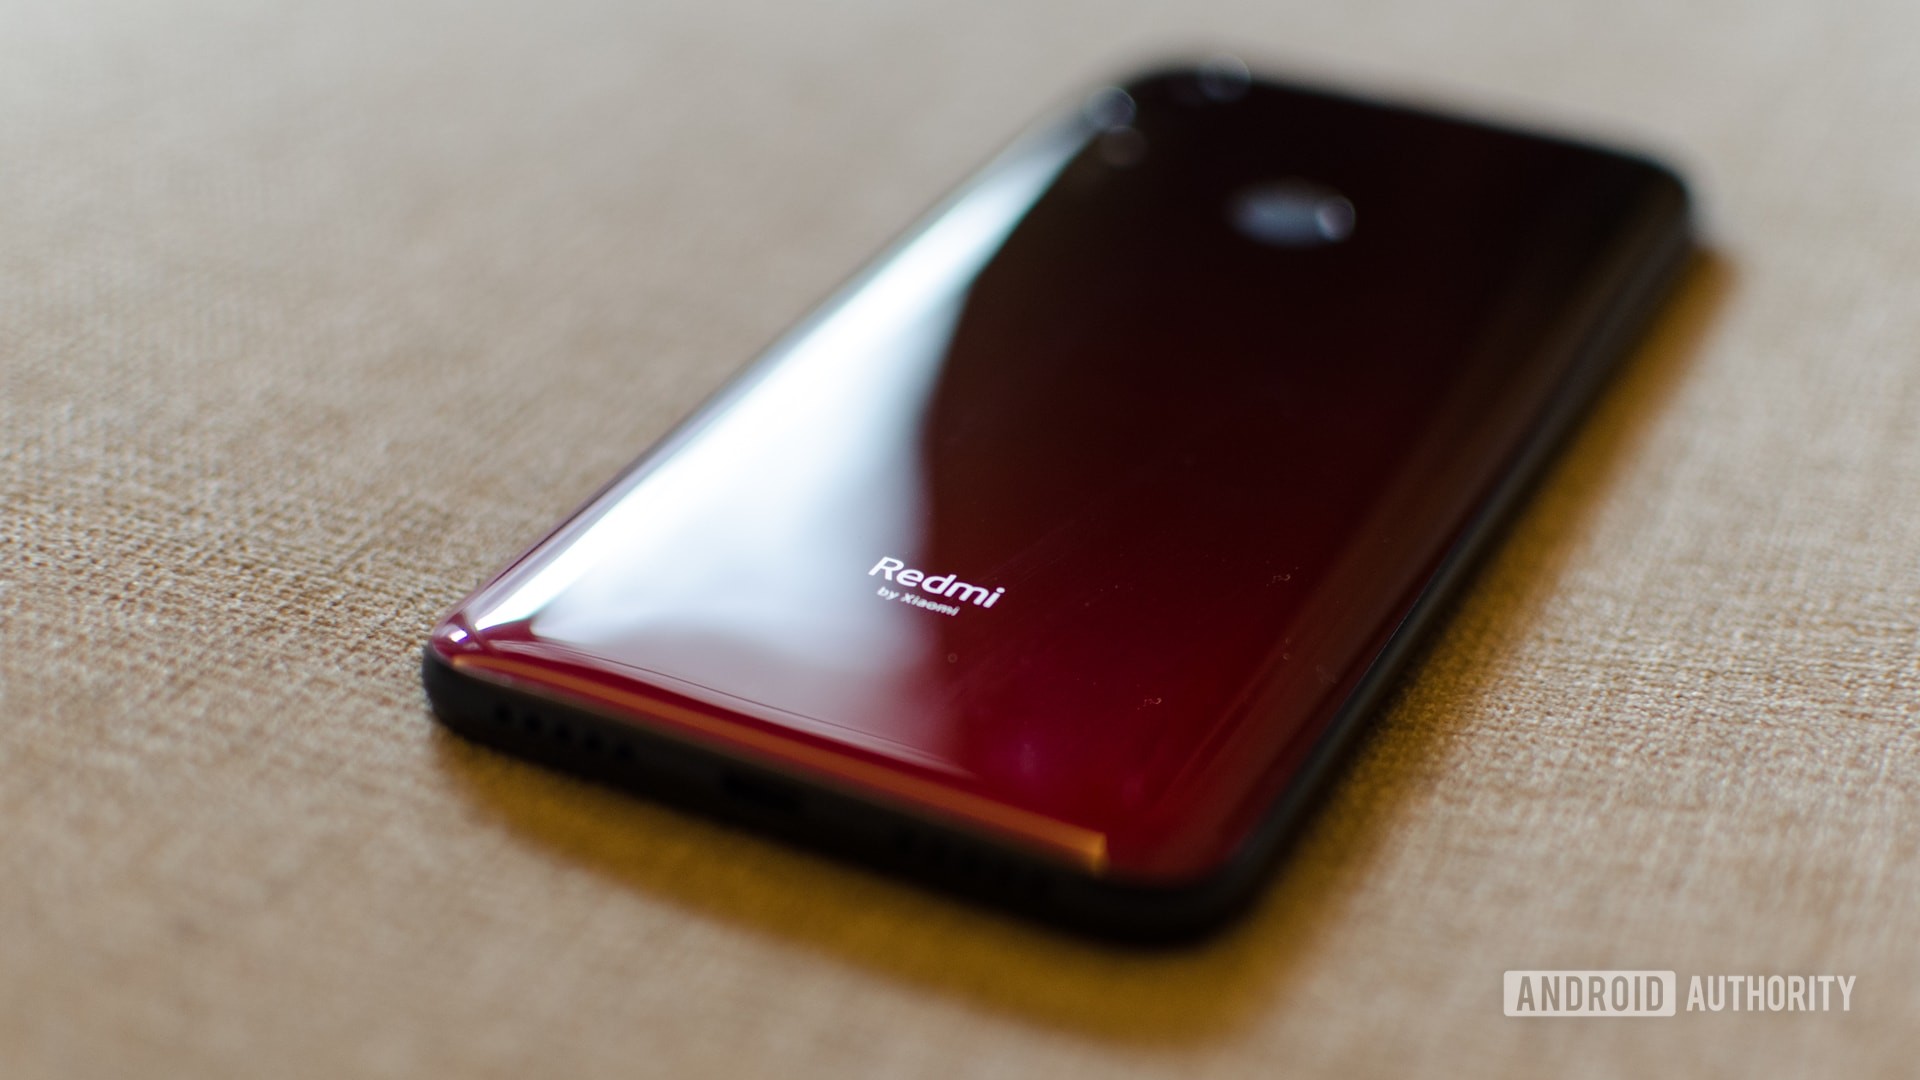 The Redmi range could be joined by the Redmi Note 7S.